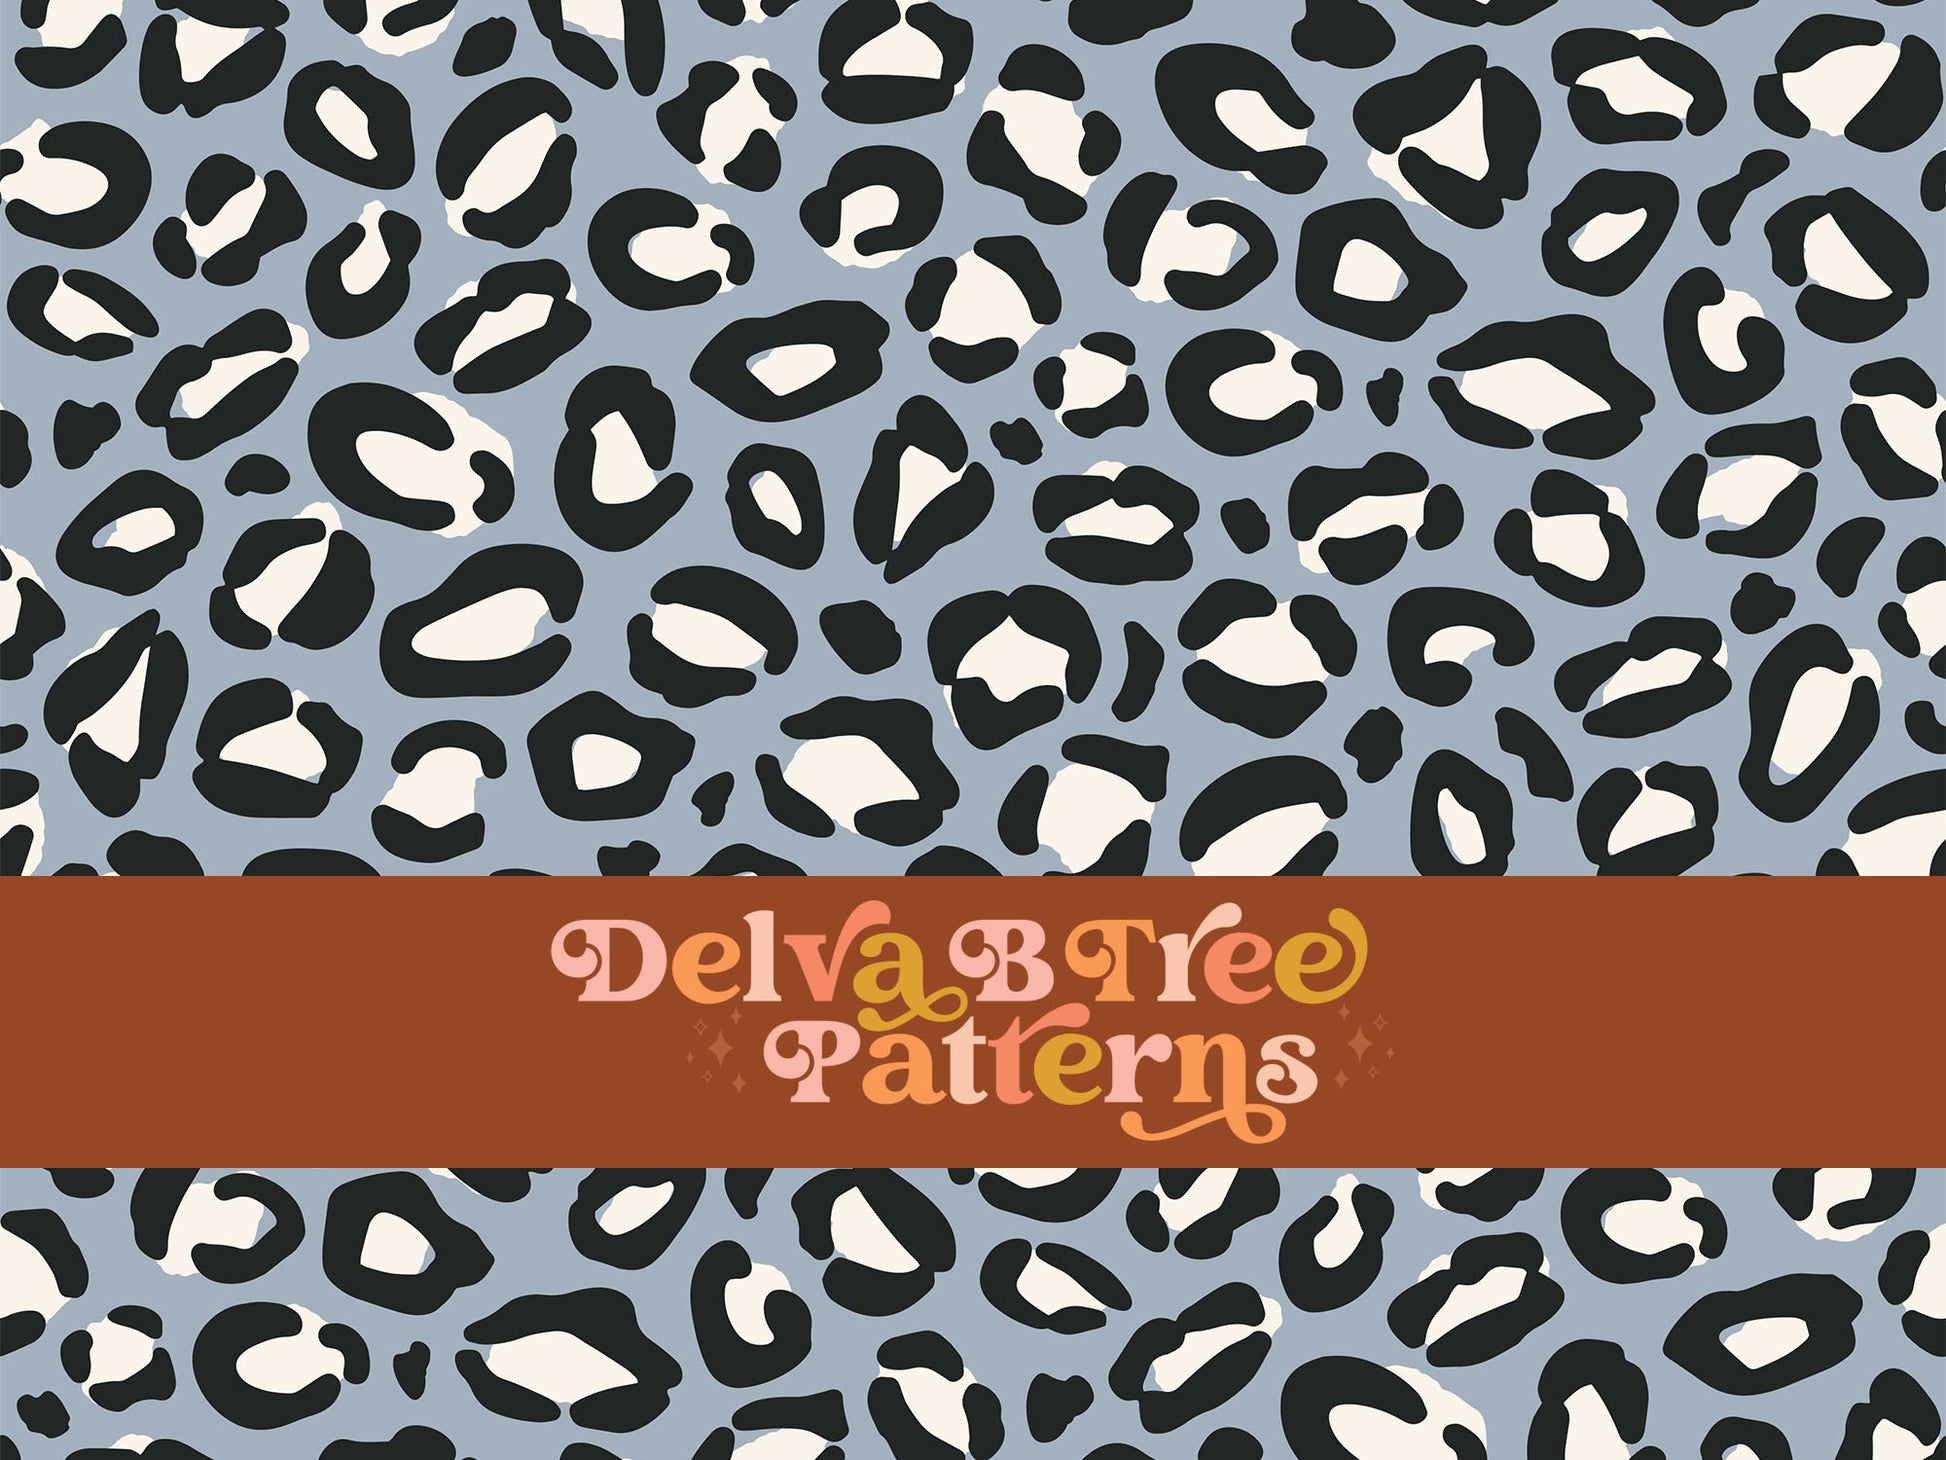 Cadet blue, ivory and black leopard seamless file for fabric printing. Animal Skin Leopard Print Repeat Pattern for textiles, polymailers, baby boy lovey blankets, nursery crib bedding, kids clothing, girls hair accessories, home decor accents, pet products.